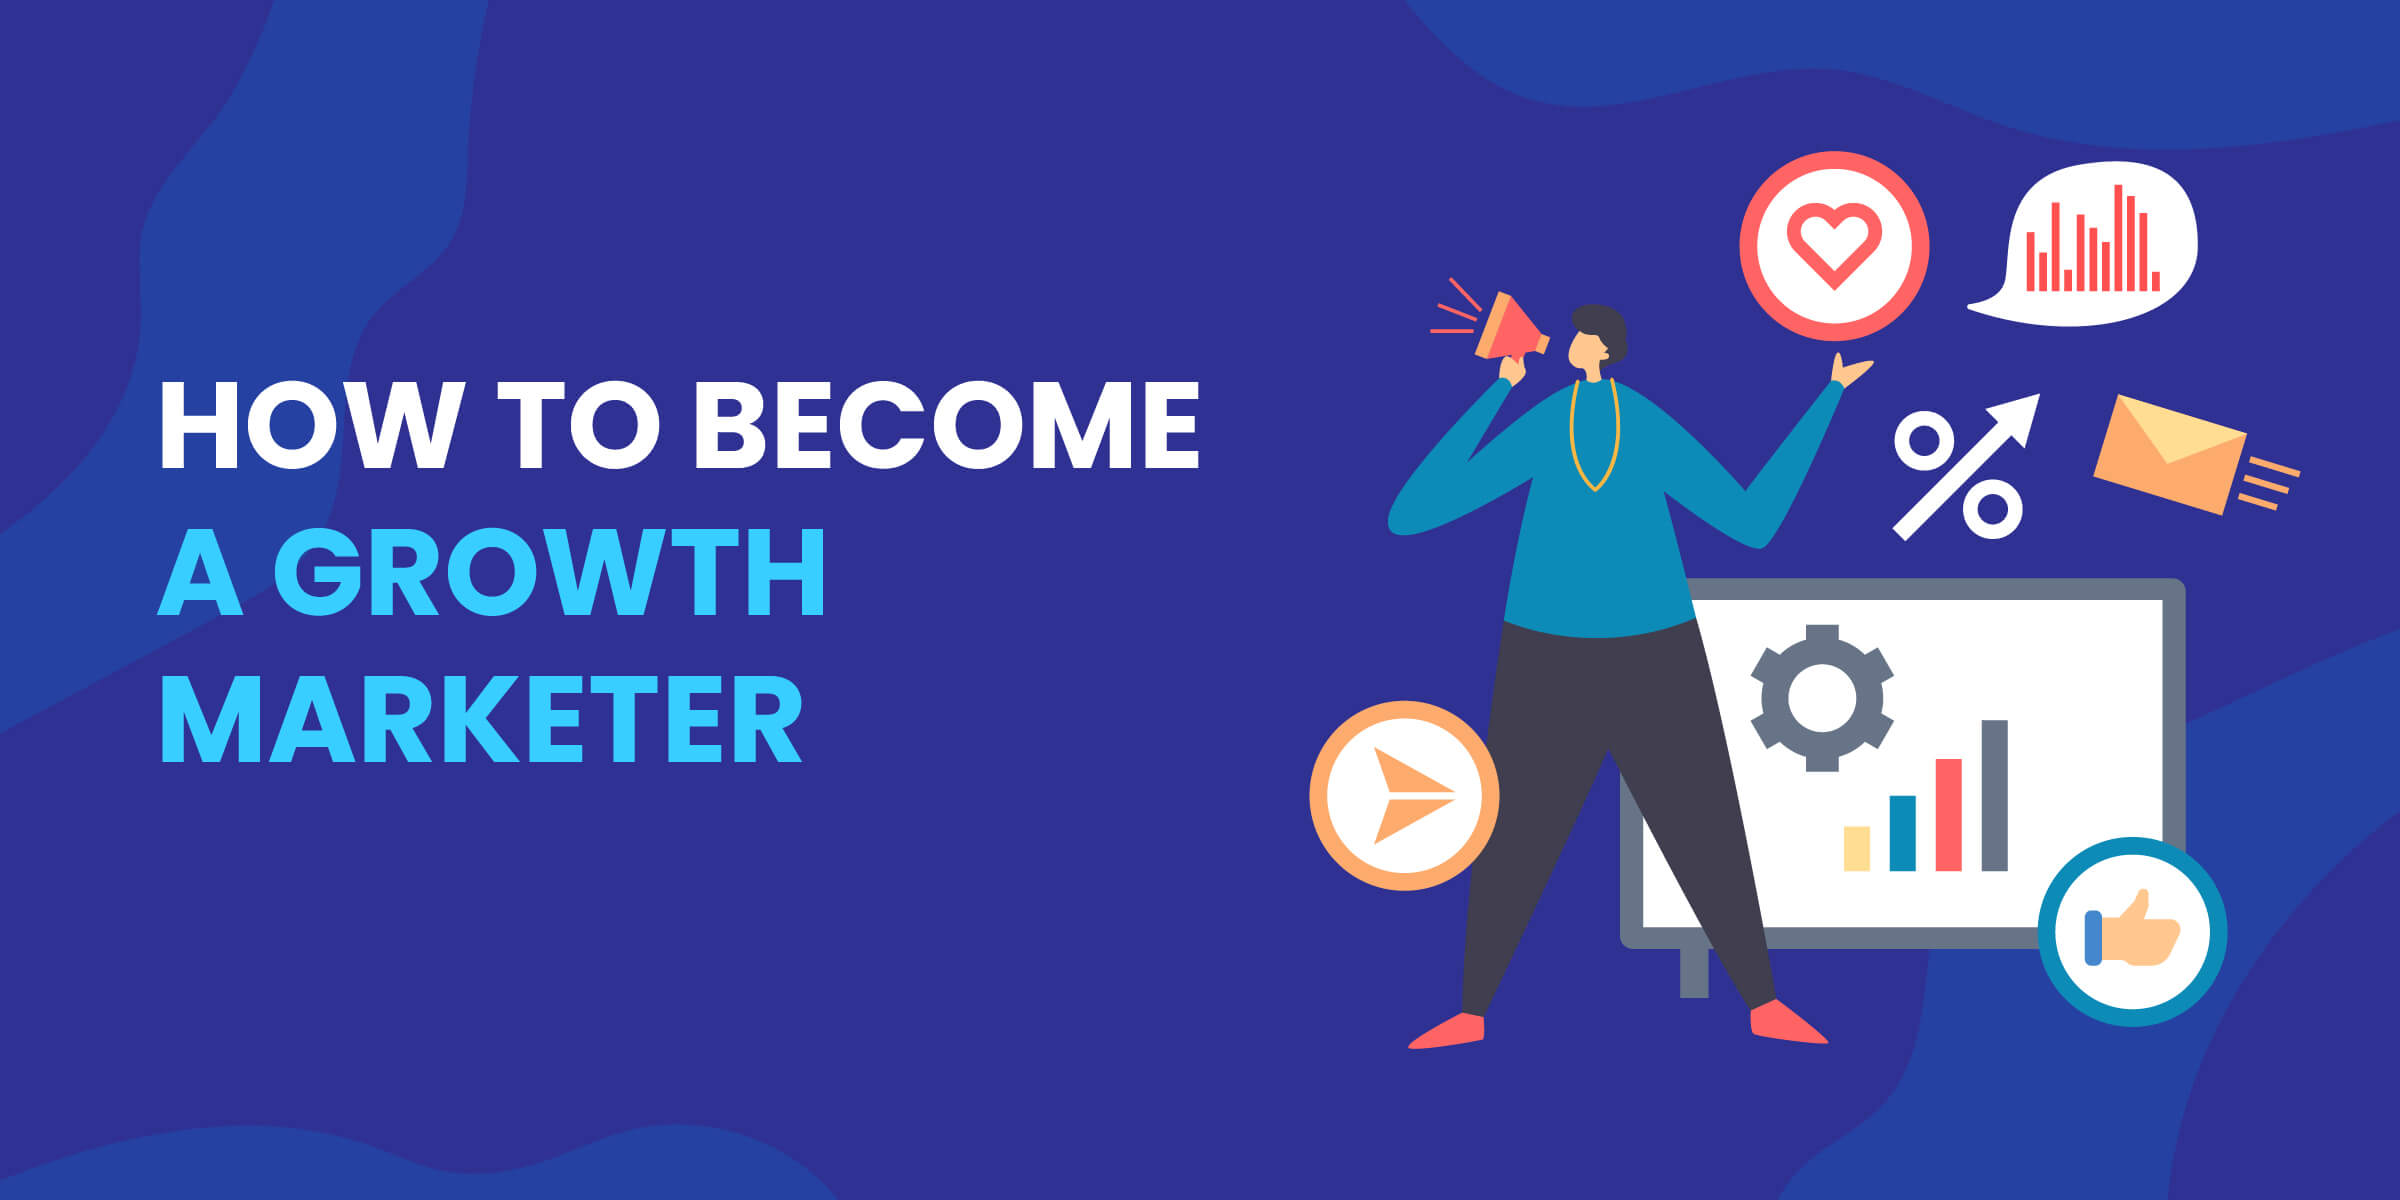 How to Become Growth Marketer